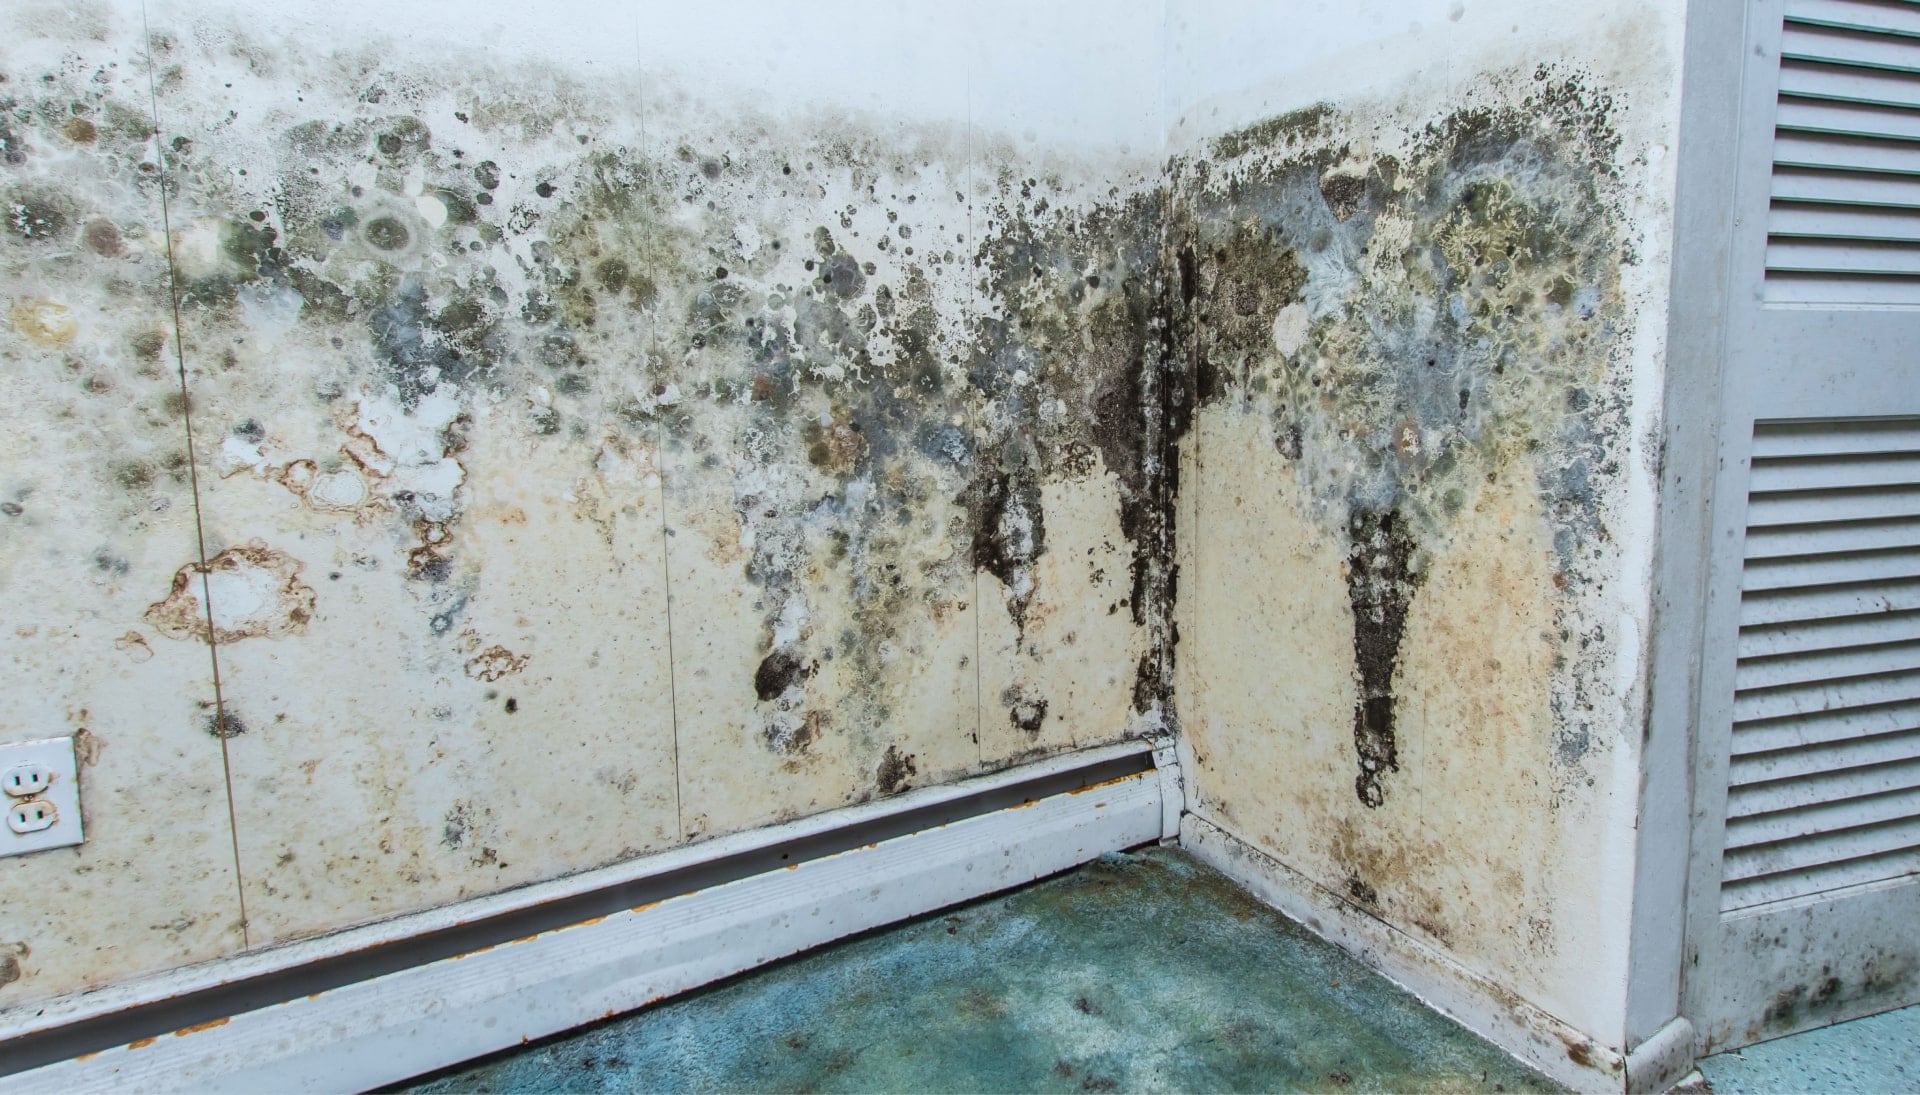 Professional mold removal, odor control, and water damage restoration service in Gilbert, Arizona.